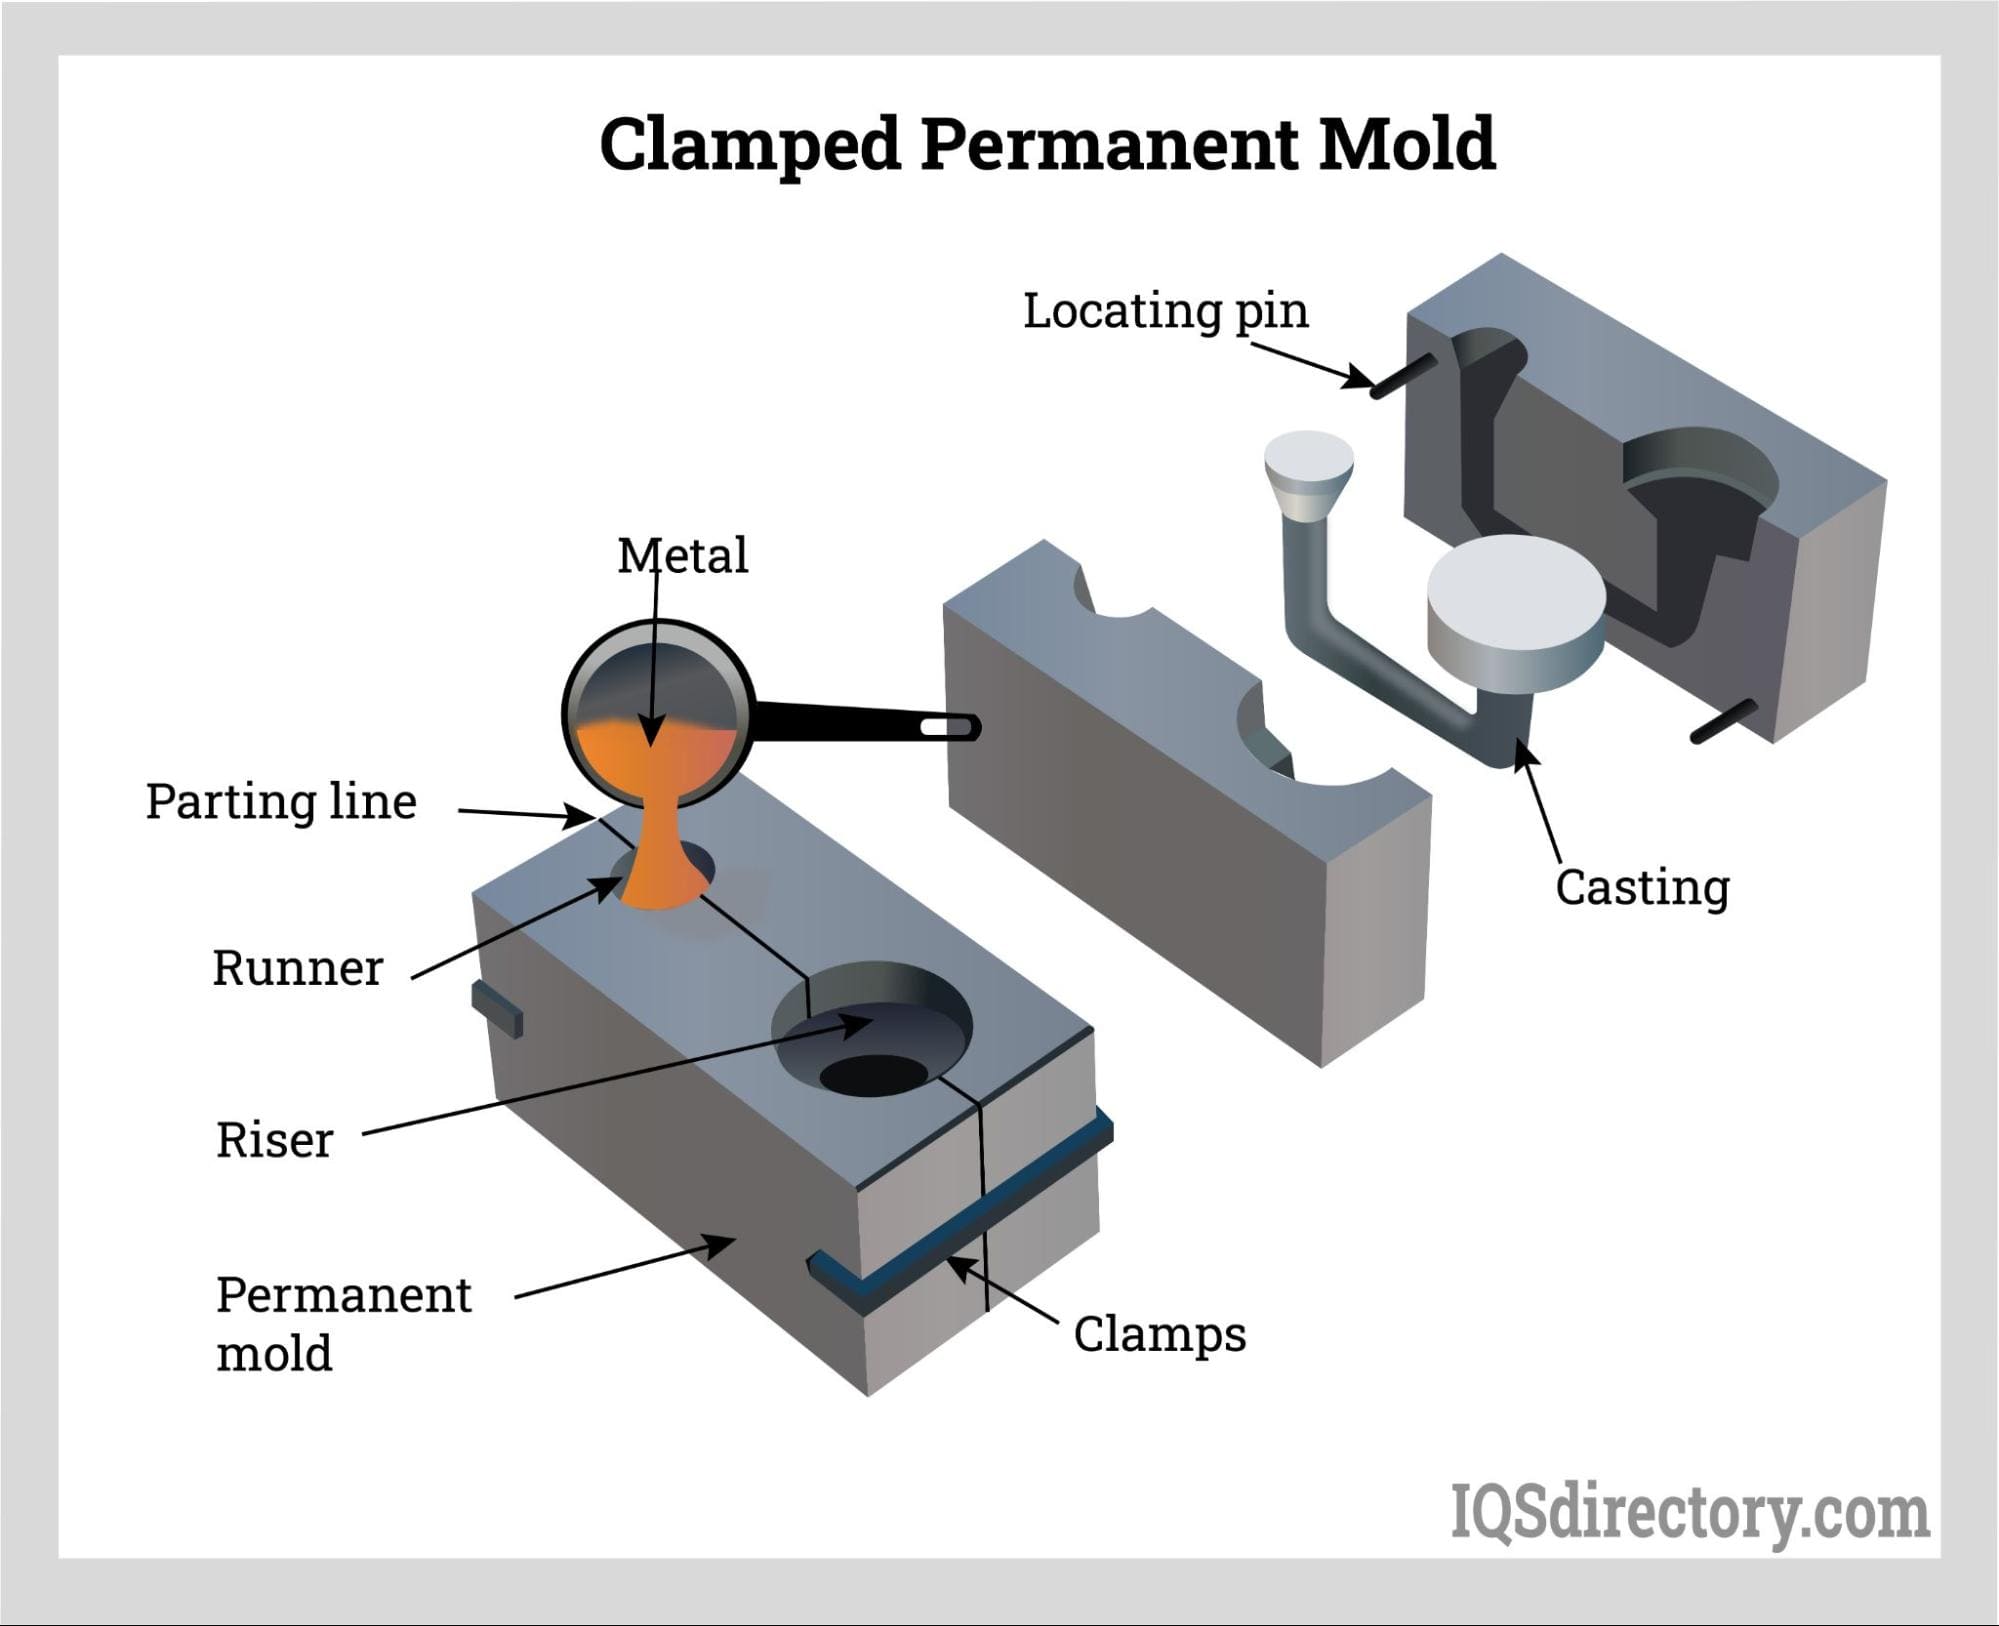 Clamped Permanent Mold